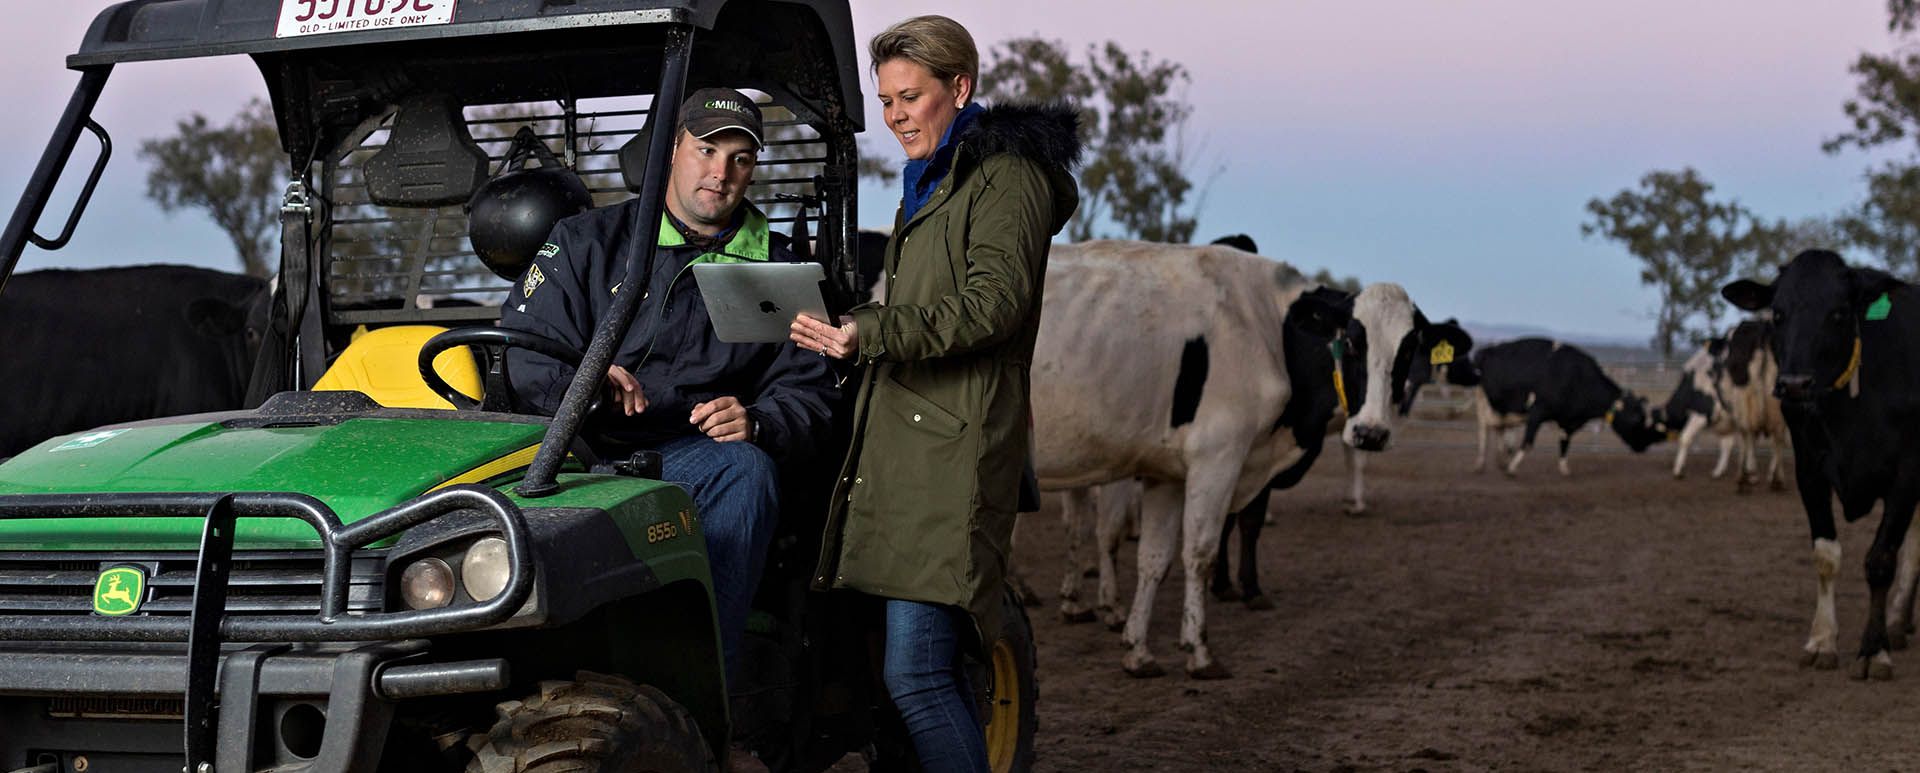 Man sitting in quad bike and woman standing next to him looking at tablet, with cattle standing in background.